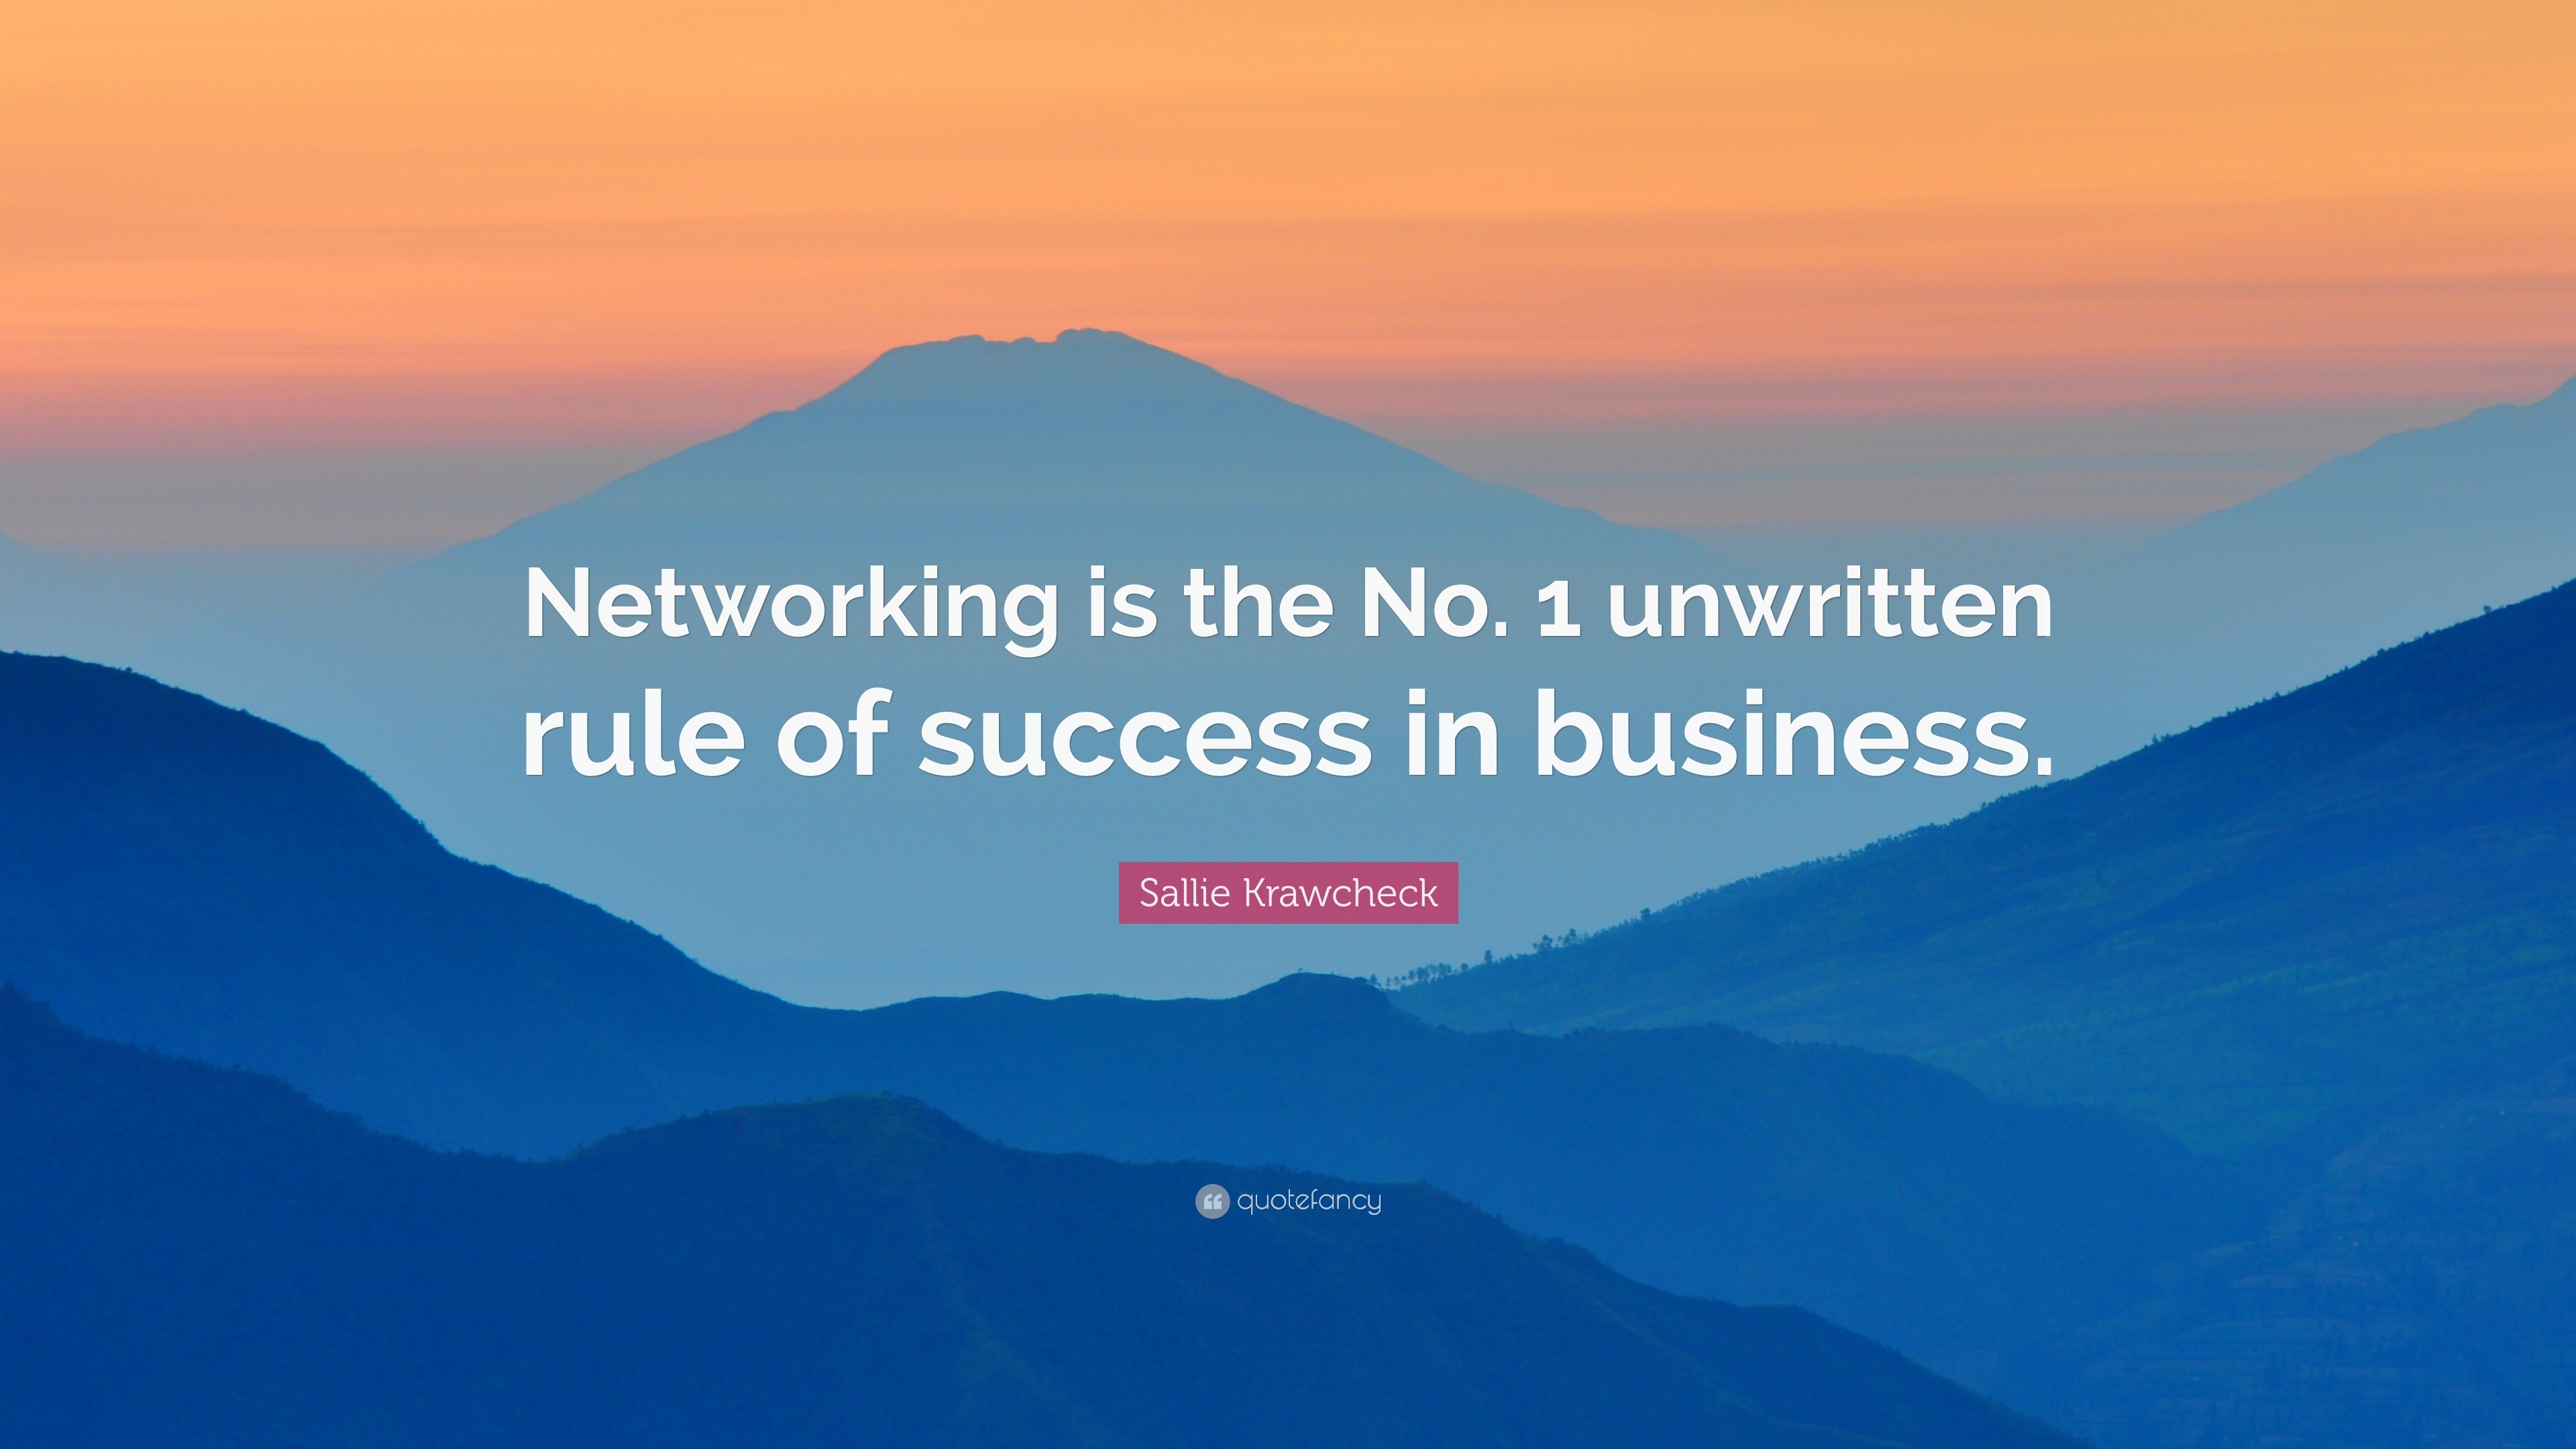 Sallie Krawcheck Quote: “Networking is the No. 1 unwritten rule of